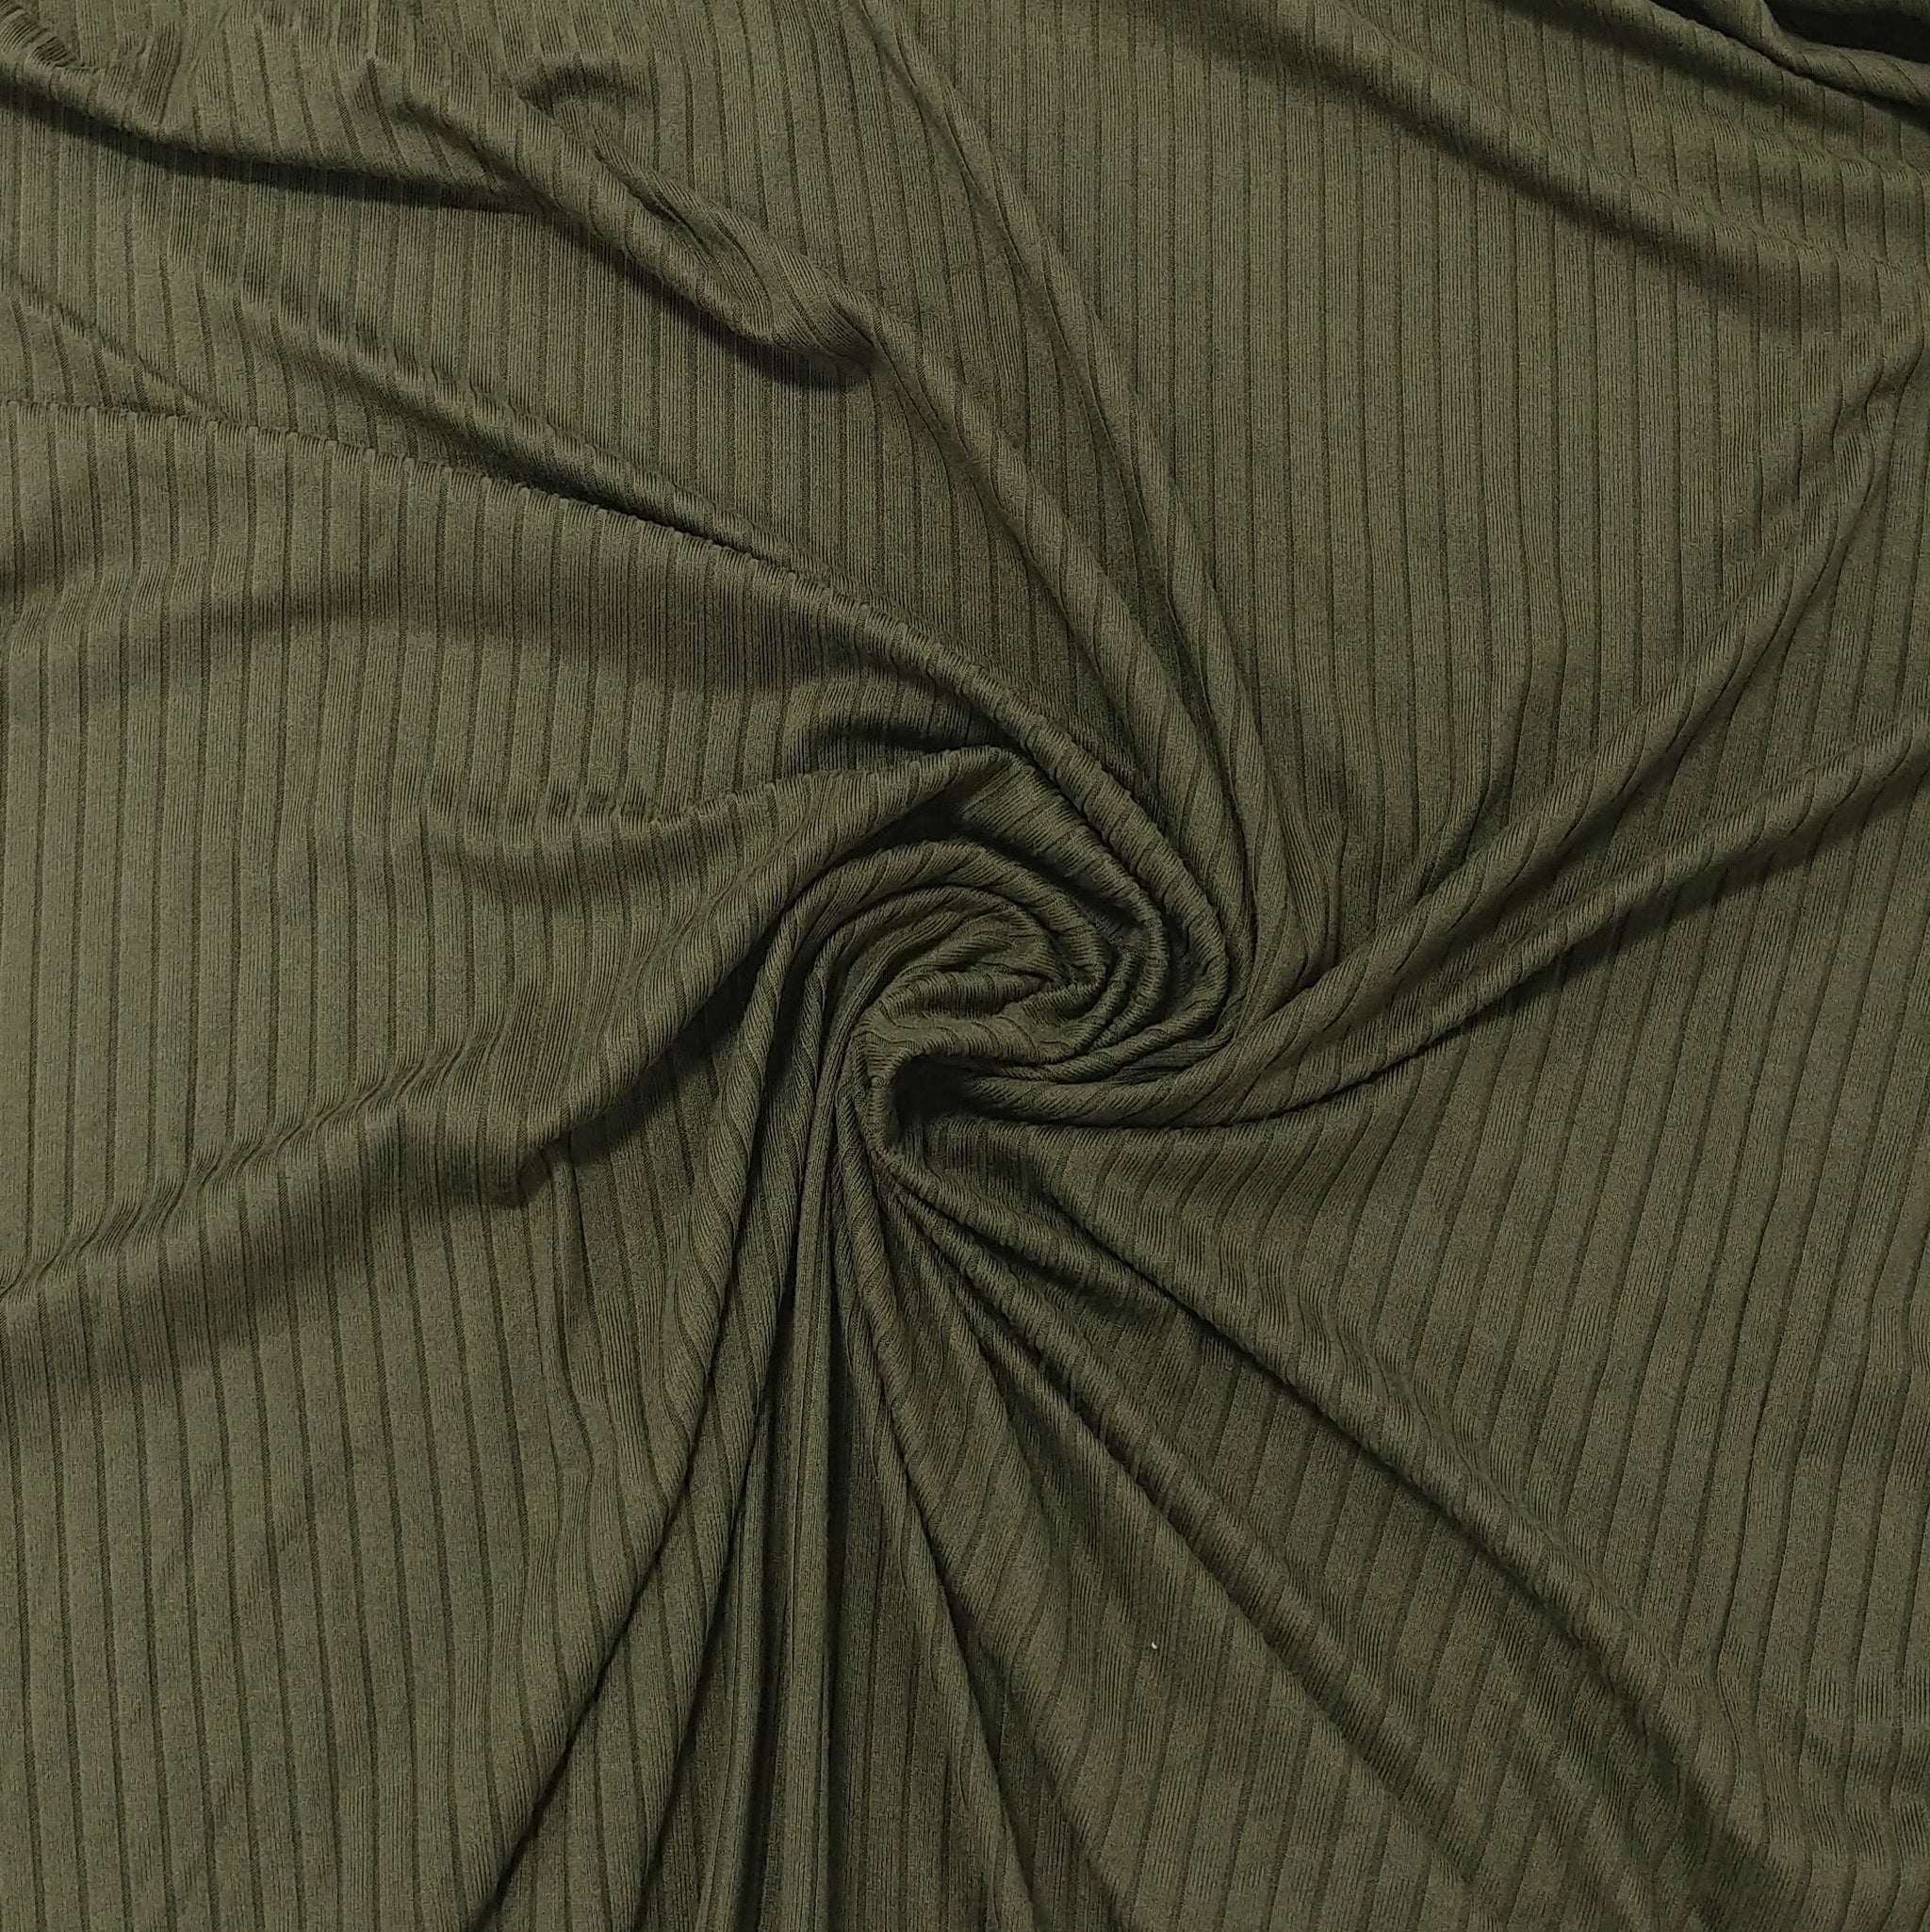 ♻️Poly Recycle Solid Light Olive Green Matte Finish Polyester Spandex  Fabric 4 Way Stretch By Yard for Swimwear (243-10)